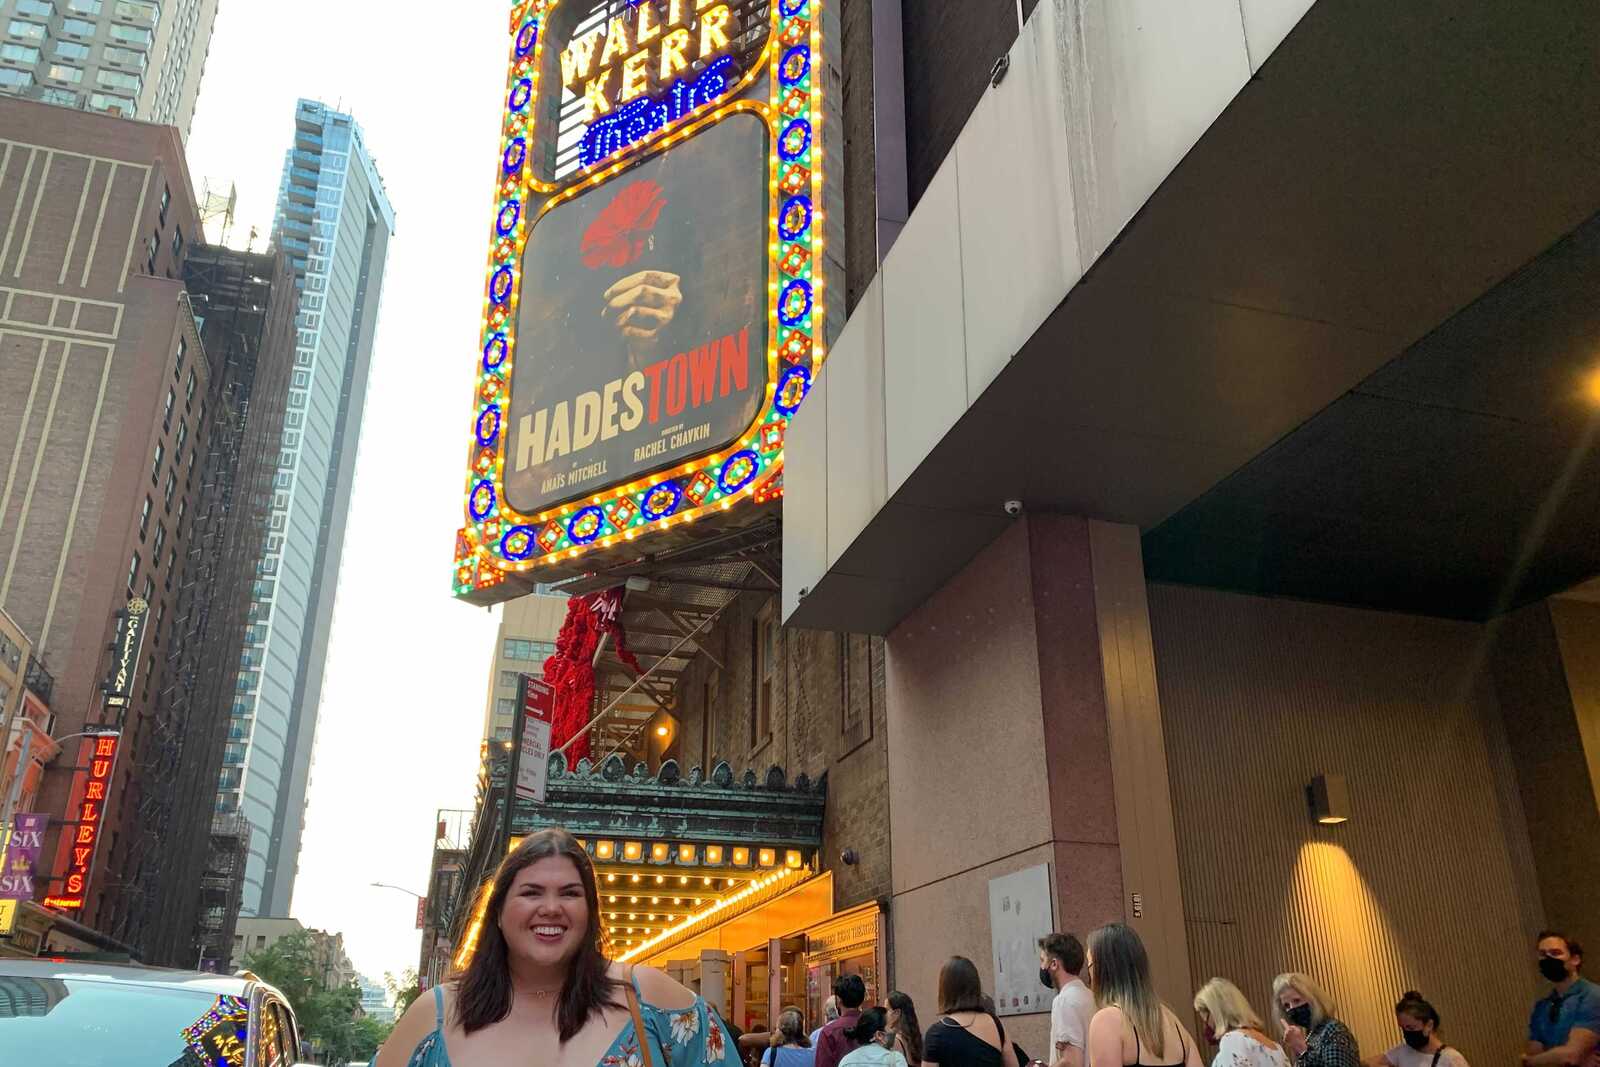 Madison smiles below the Hadestown marquee